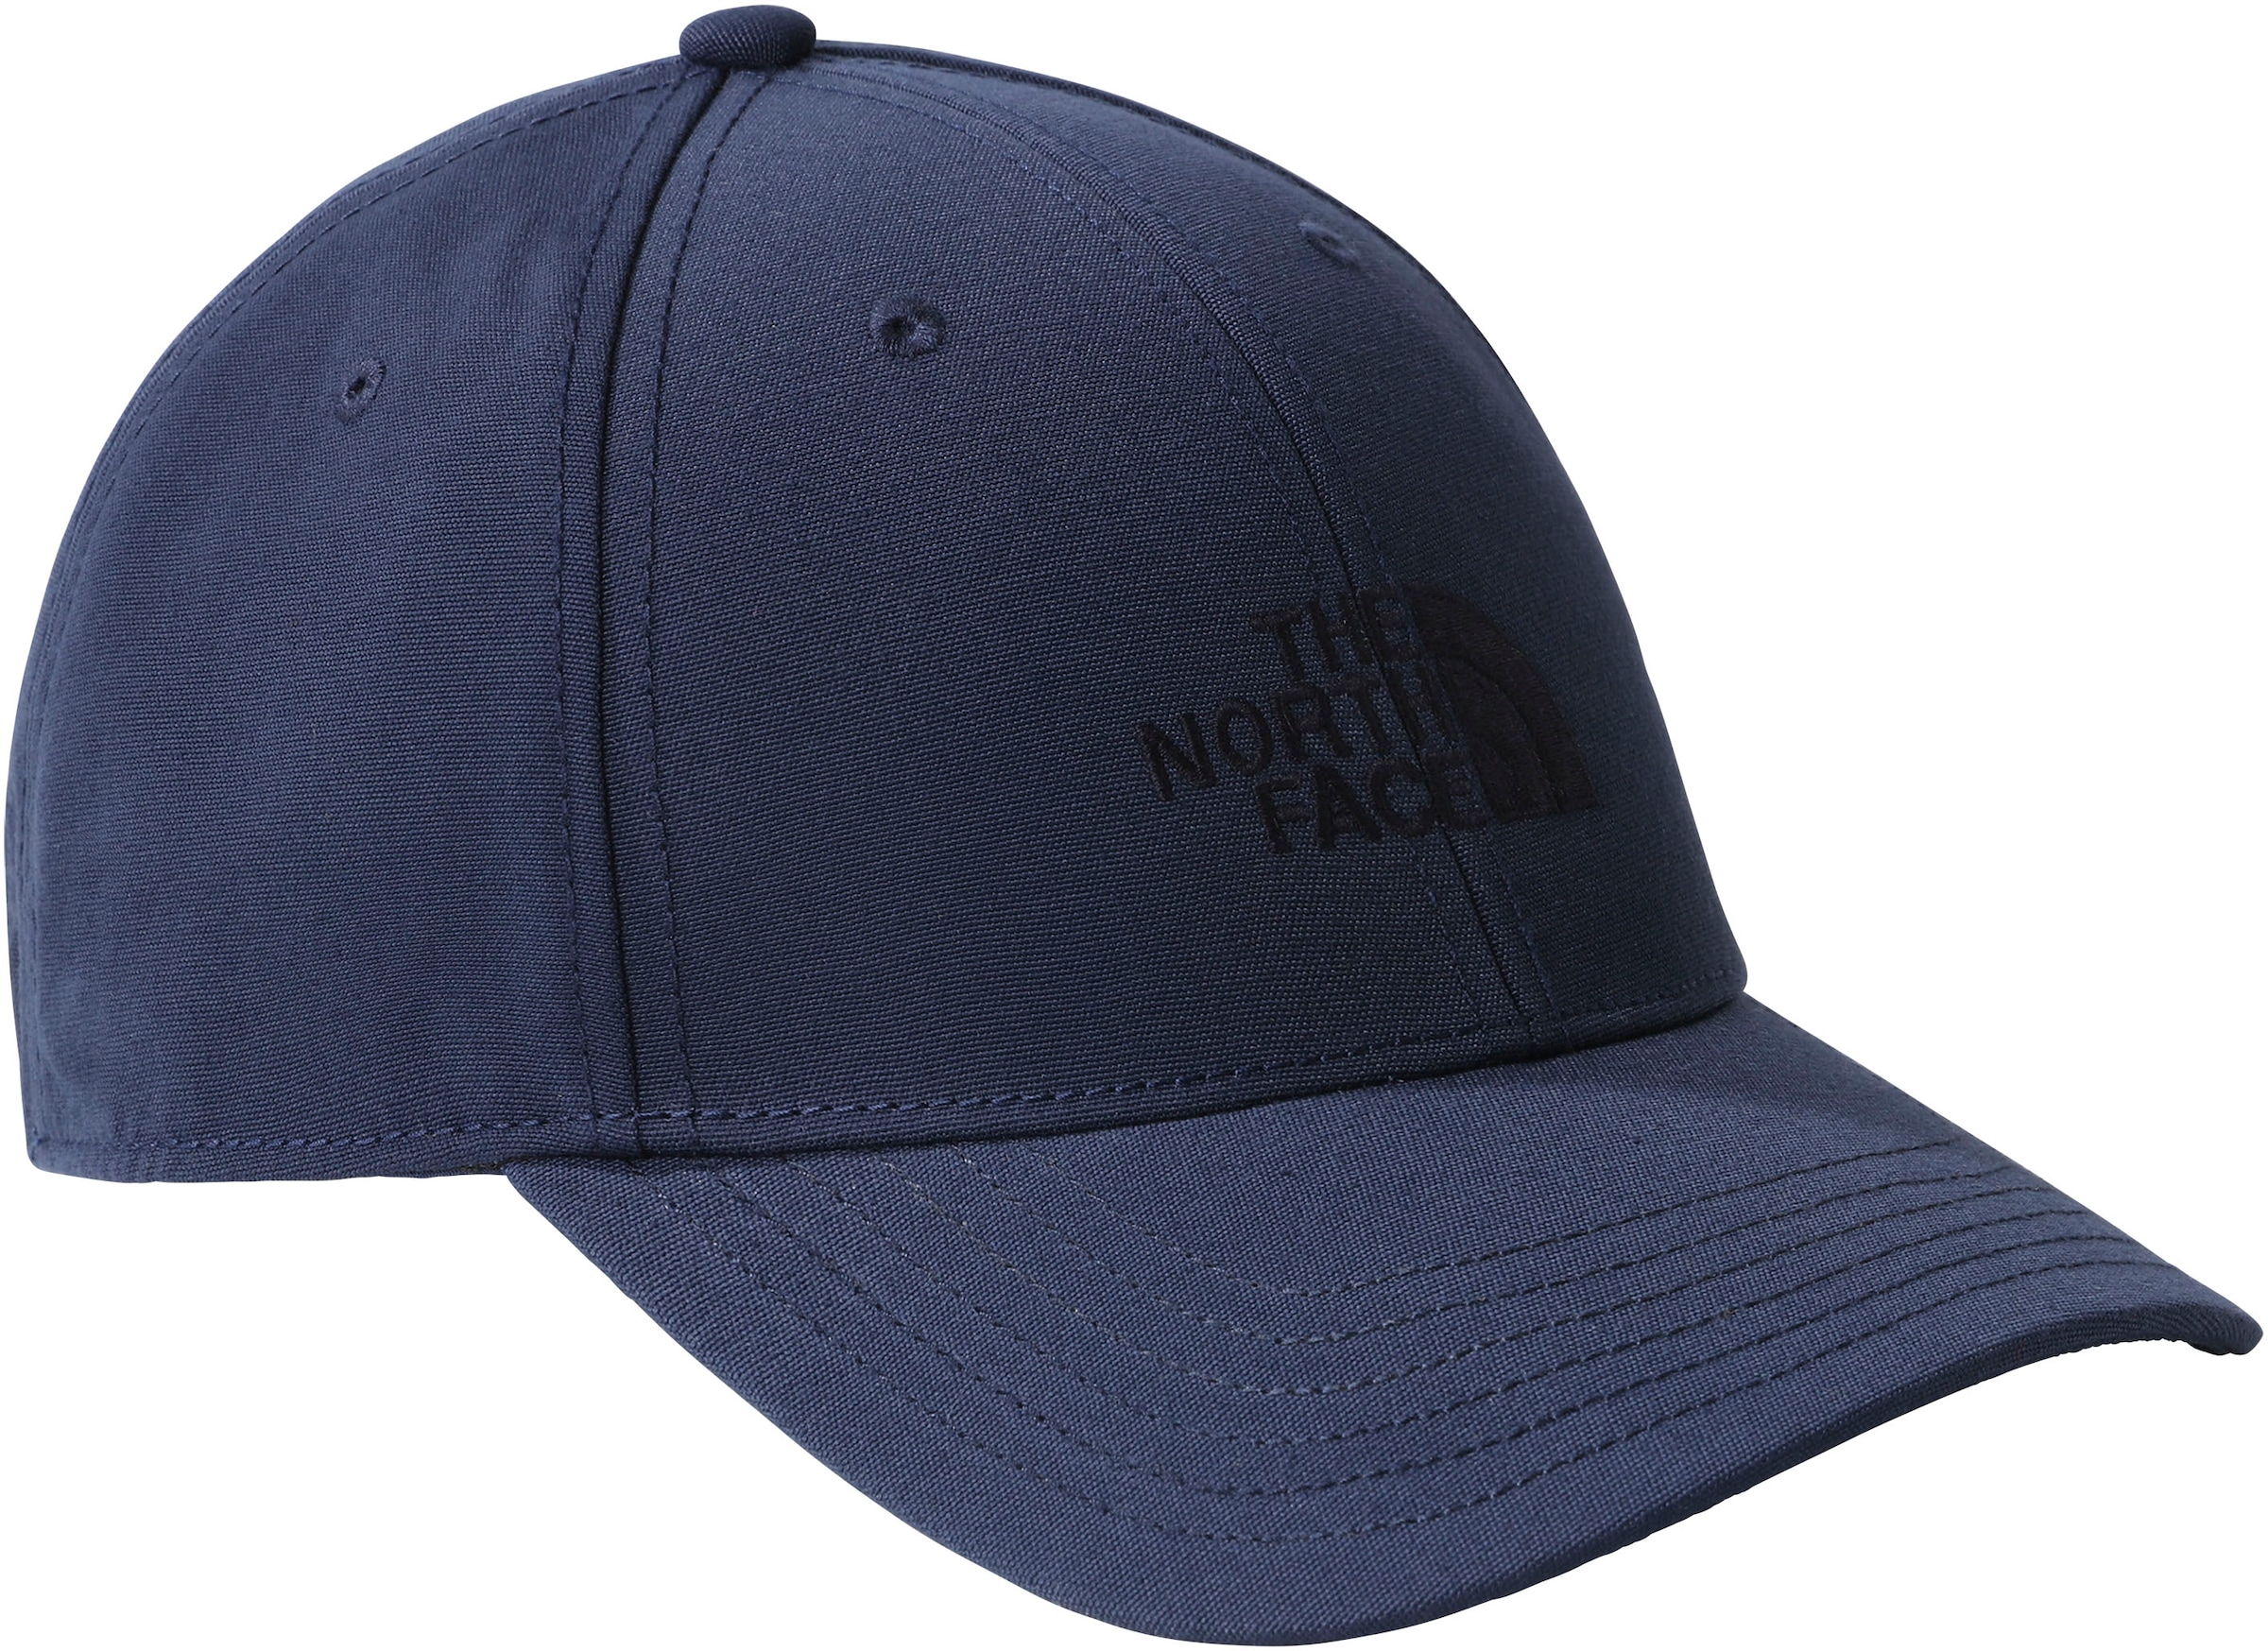 »RECYCLED OTTO | CLASSIC bestellen Cap bei North The 66 Baseball HAT« OTTO Face